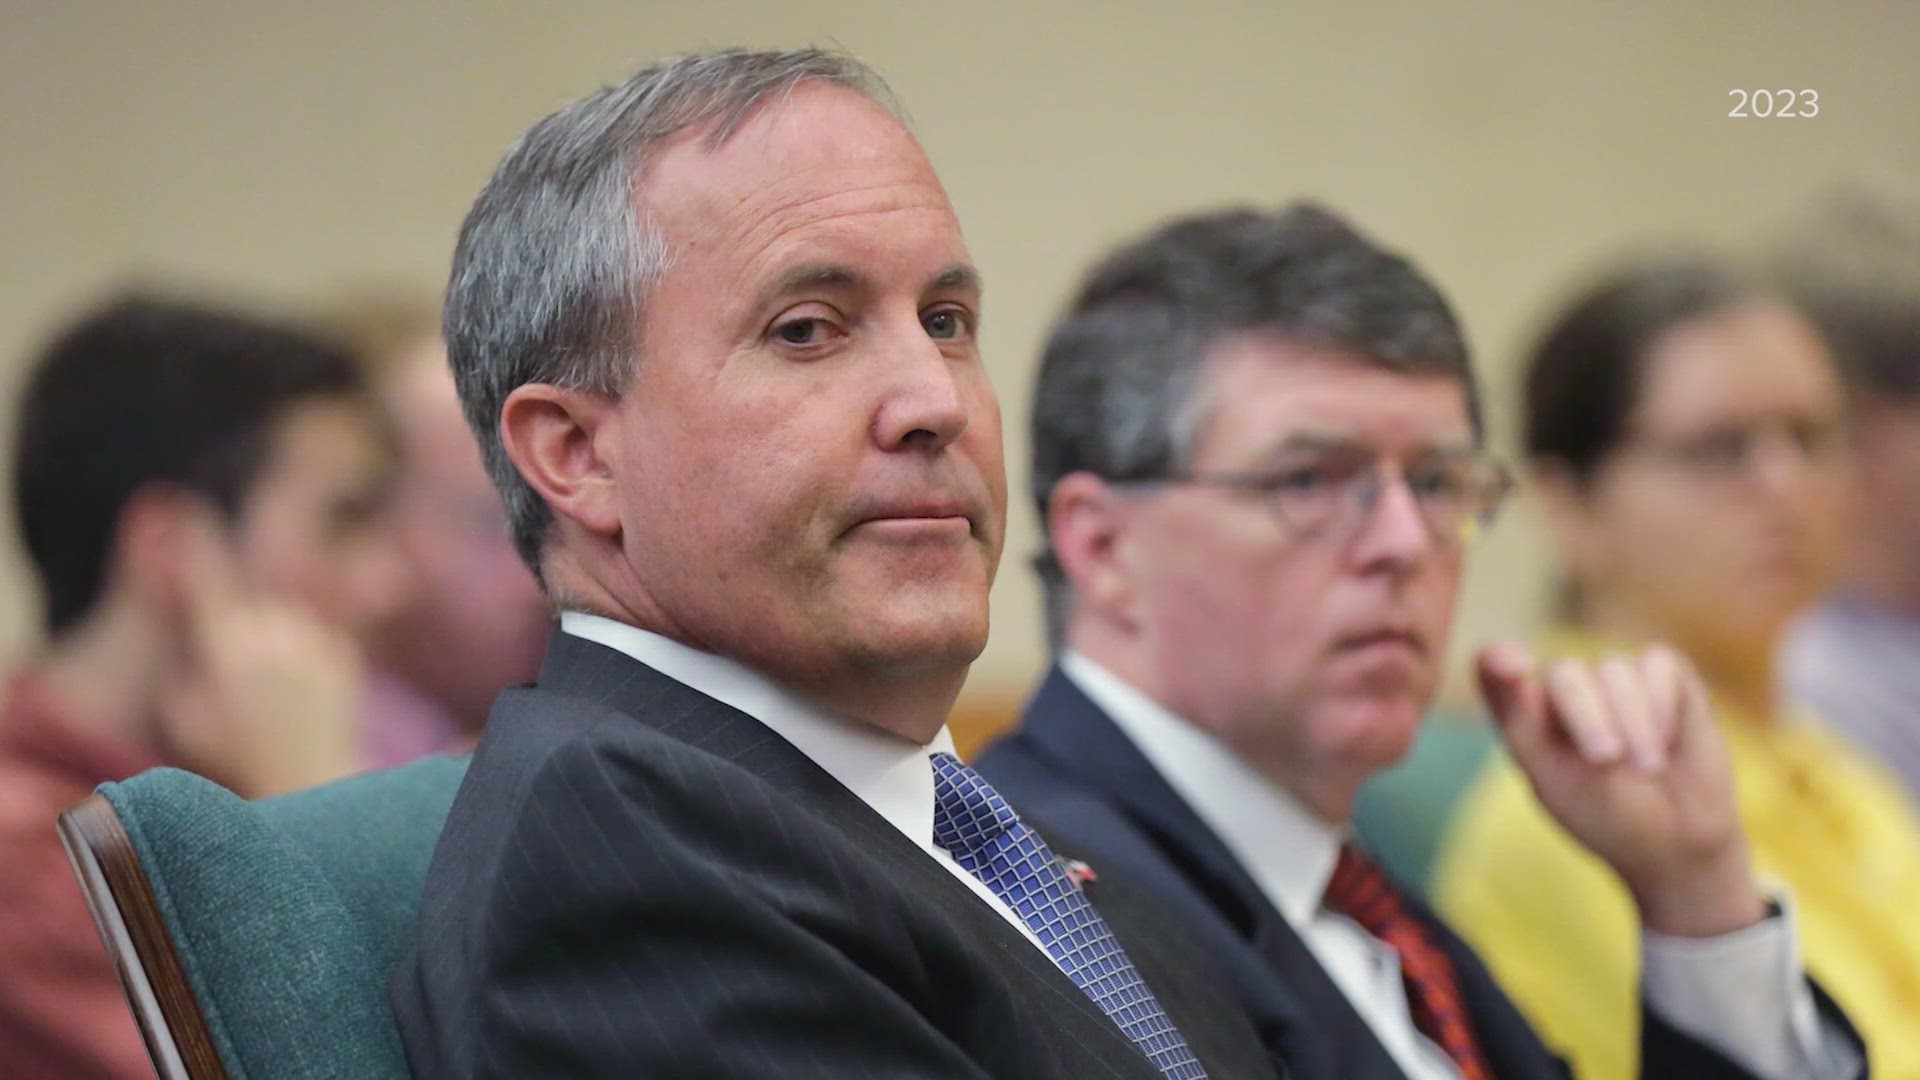 The Ken Paxton impeachment trial begins Tuesday in Austin, Texas. Jason Whitely has the latest details you need to know ahead of then.